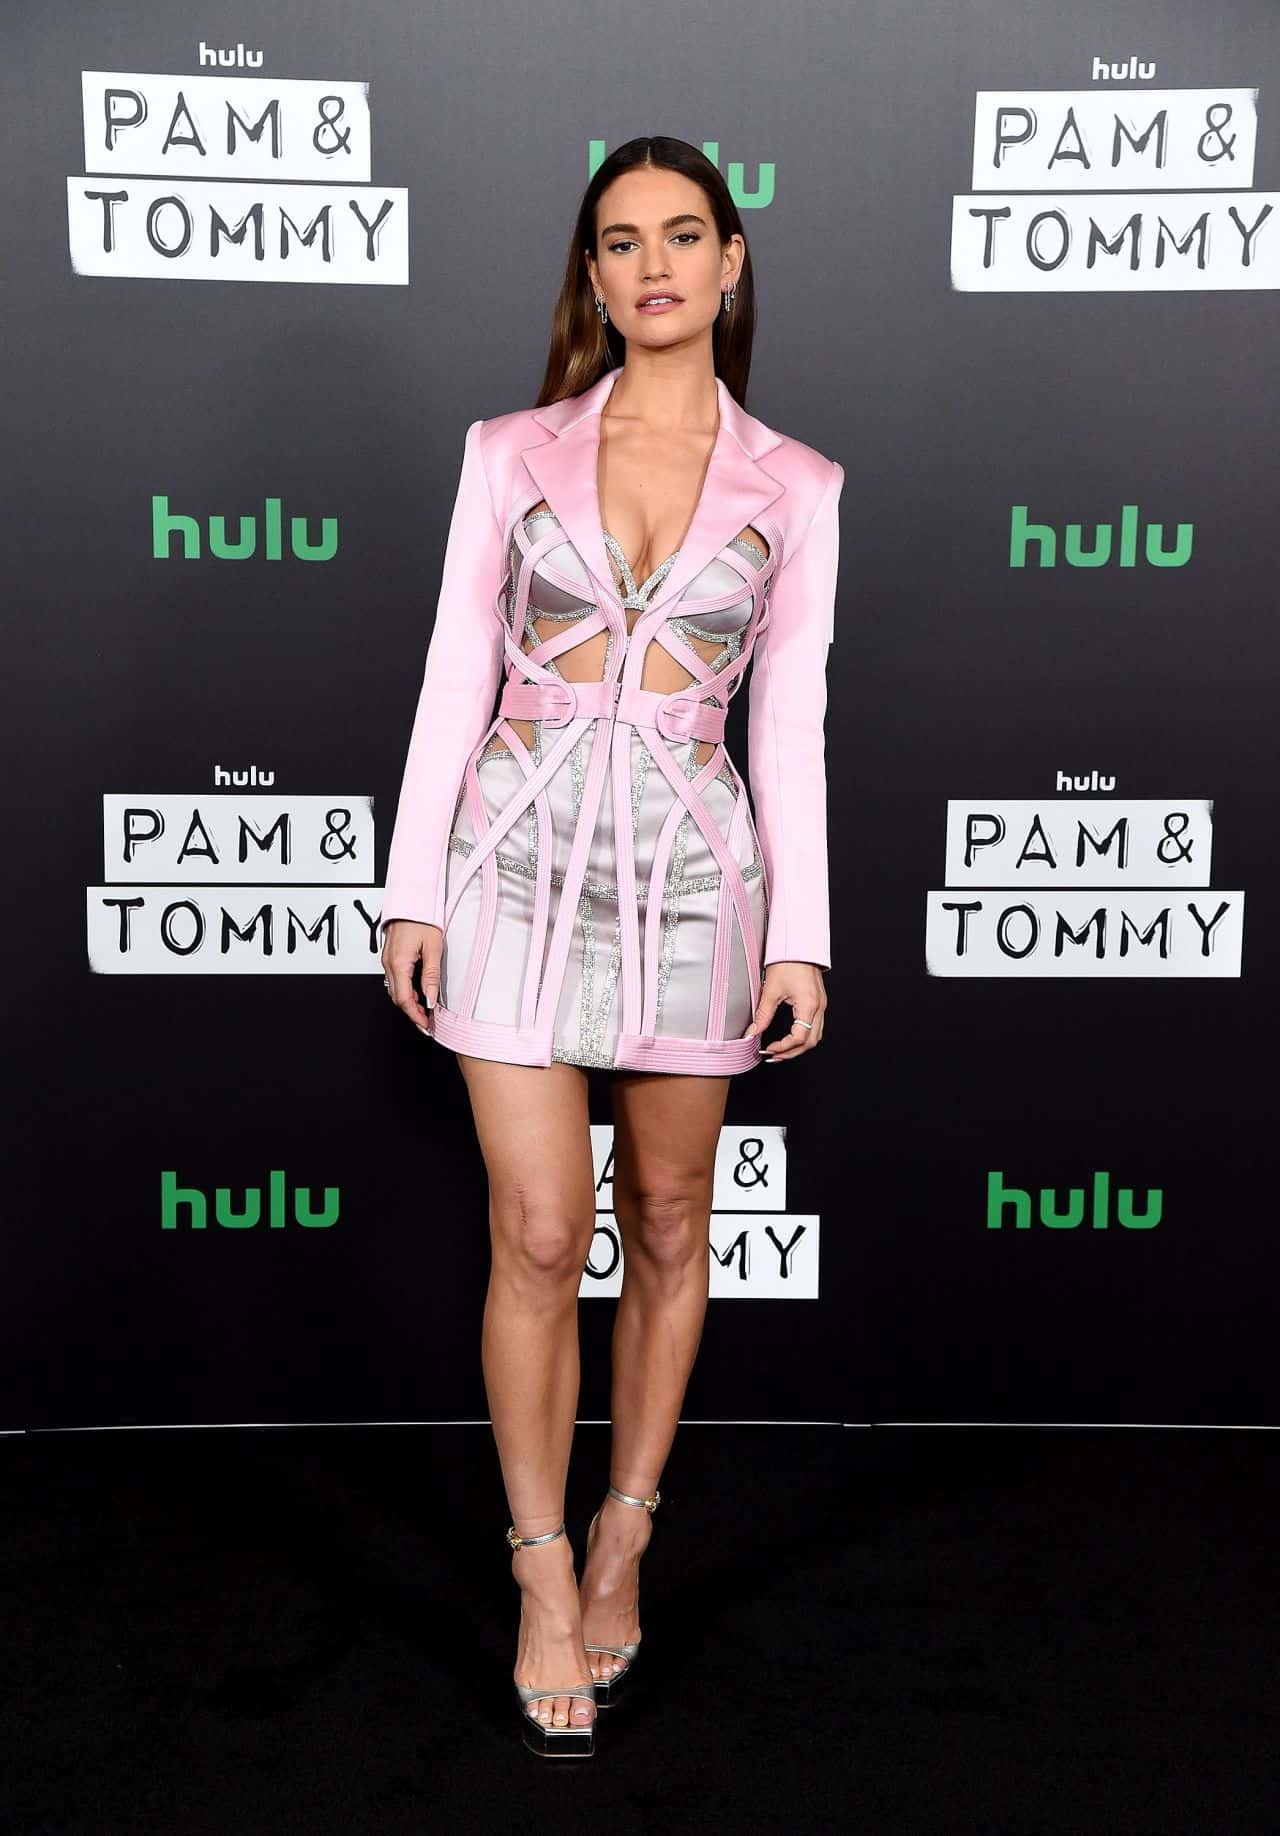 Lily James was Spectacular in a Versace Dress at the Pam & Tommy Photo-call in Los Angeles